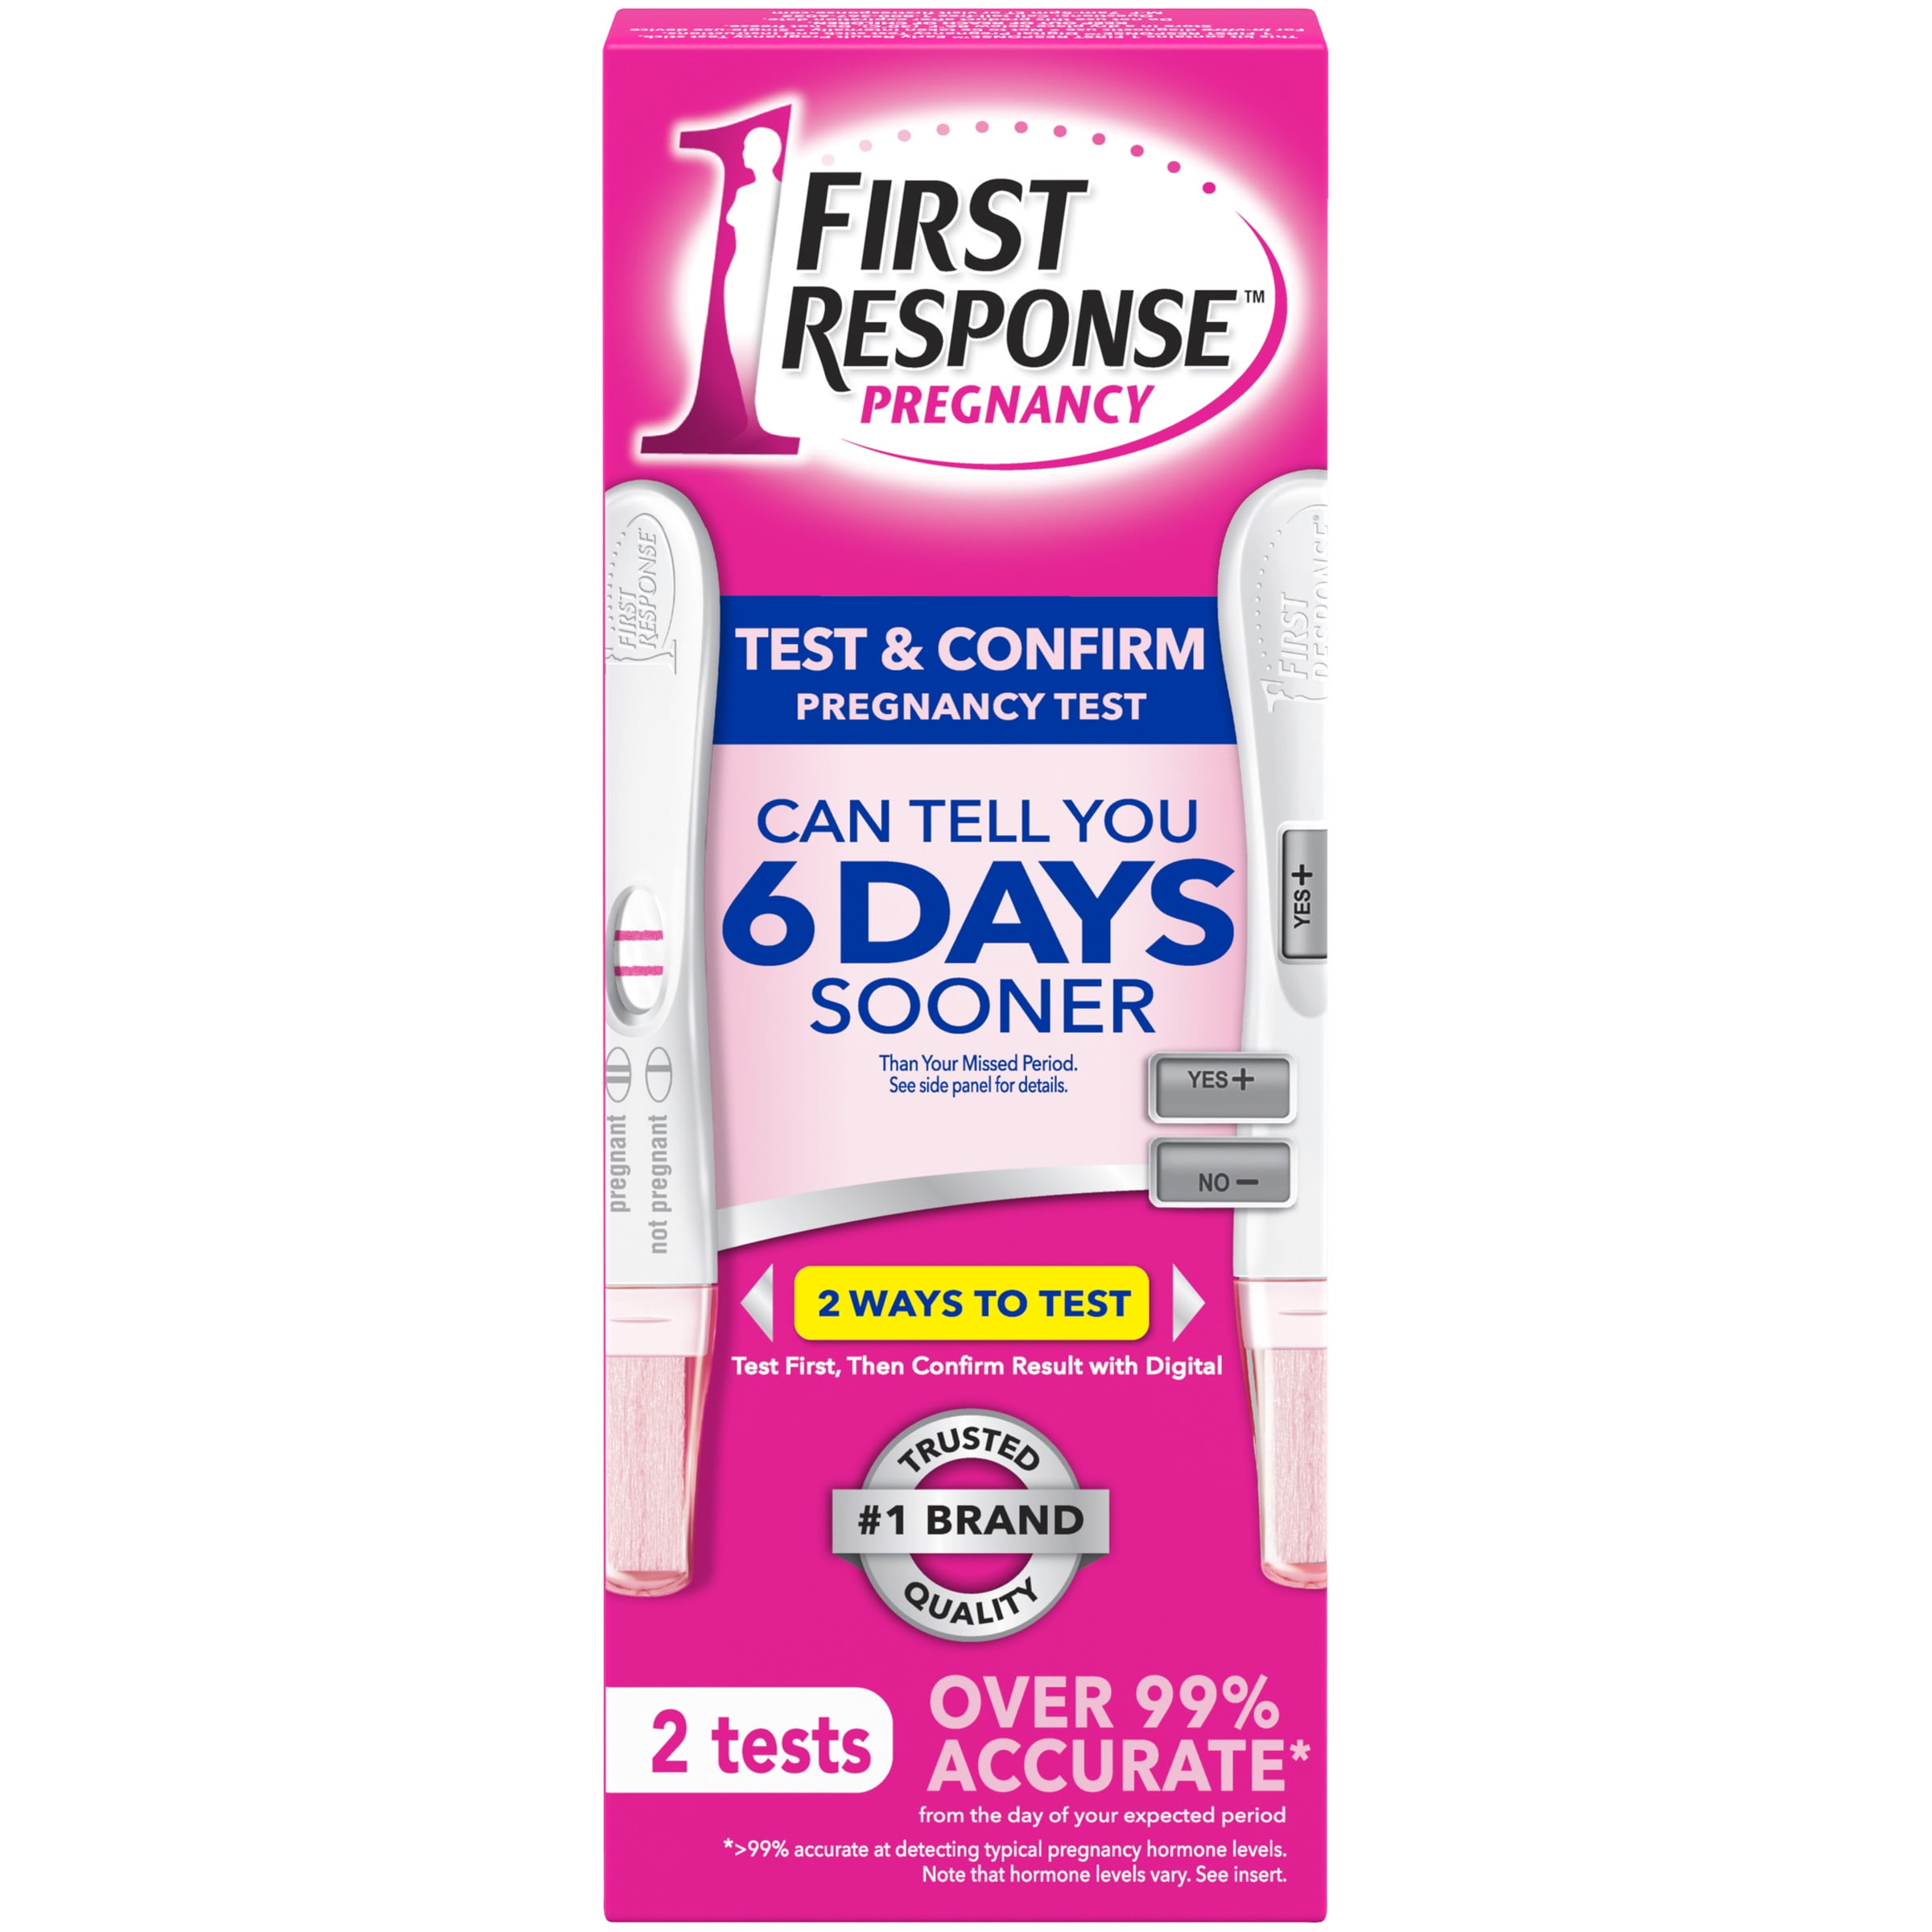 First Response Test & Confirm Pregnancy Test, 1 Line Test and 1 Digital